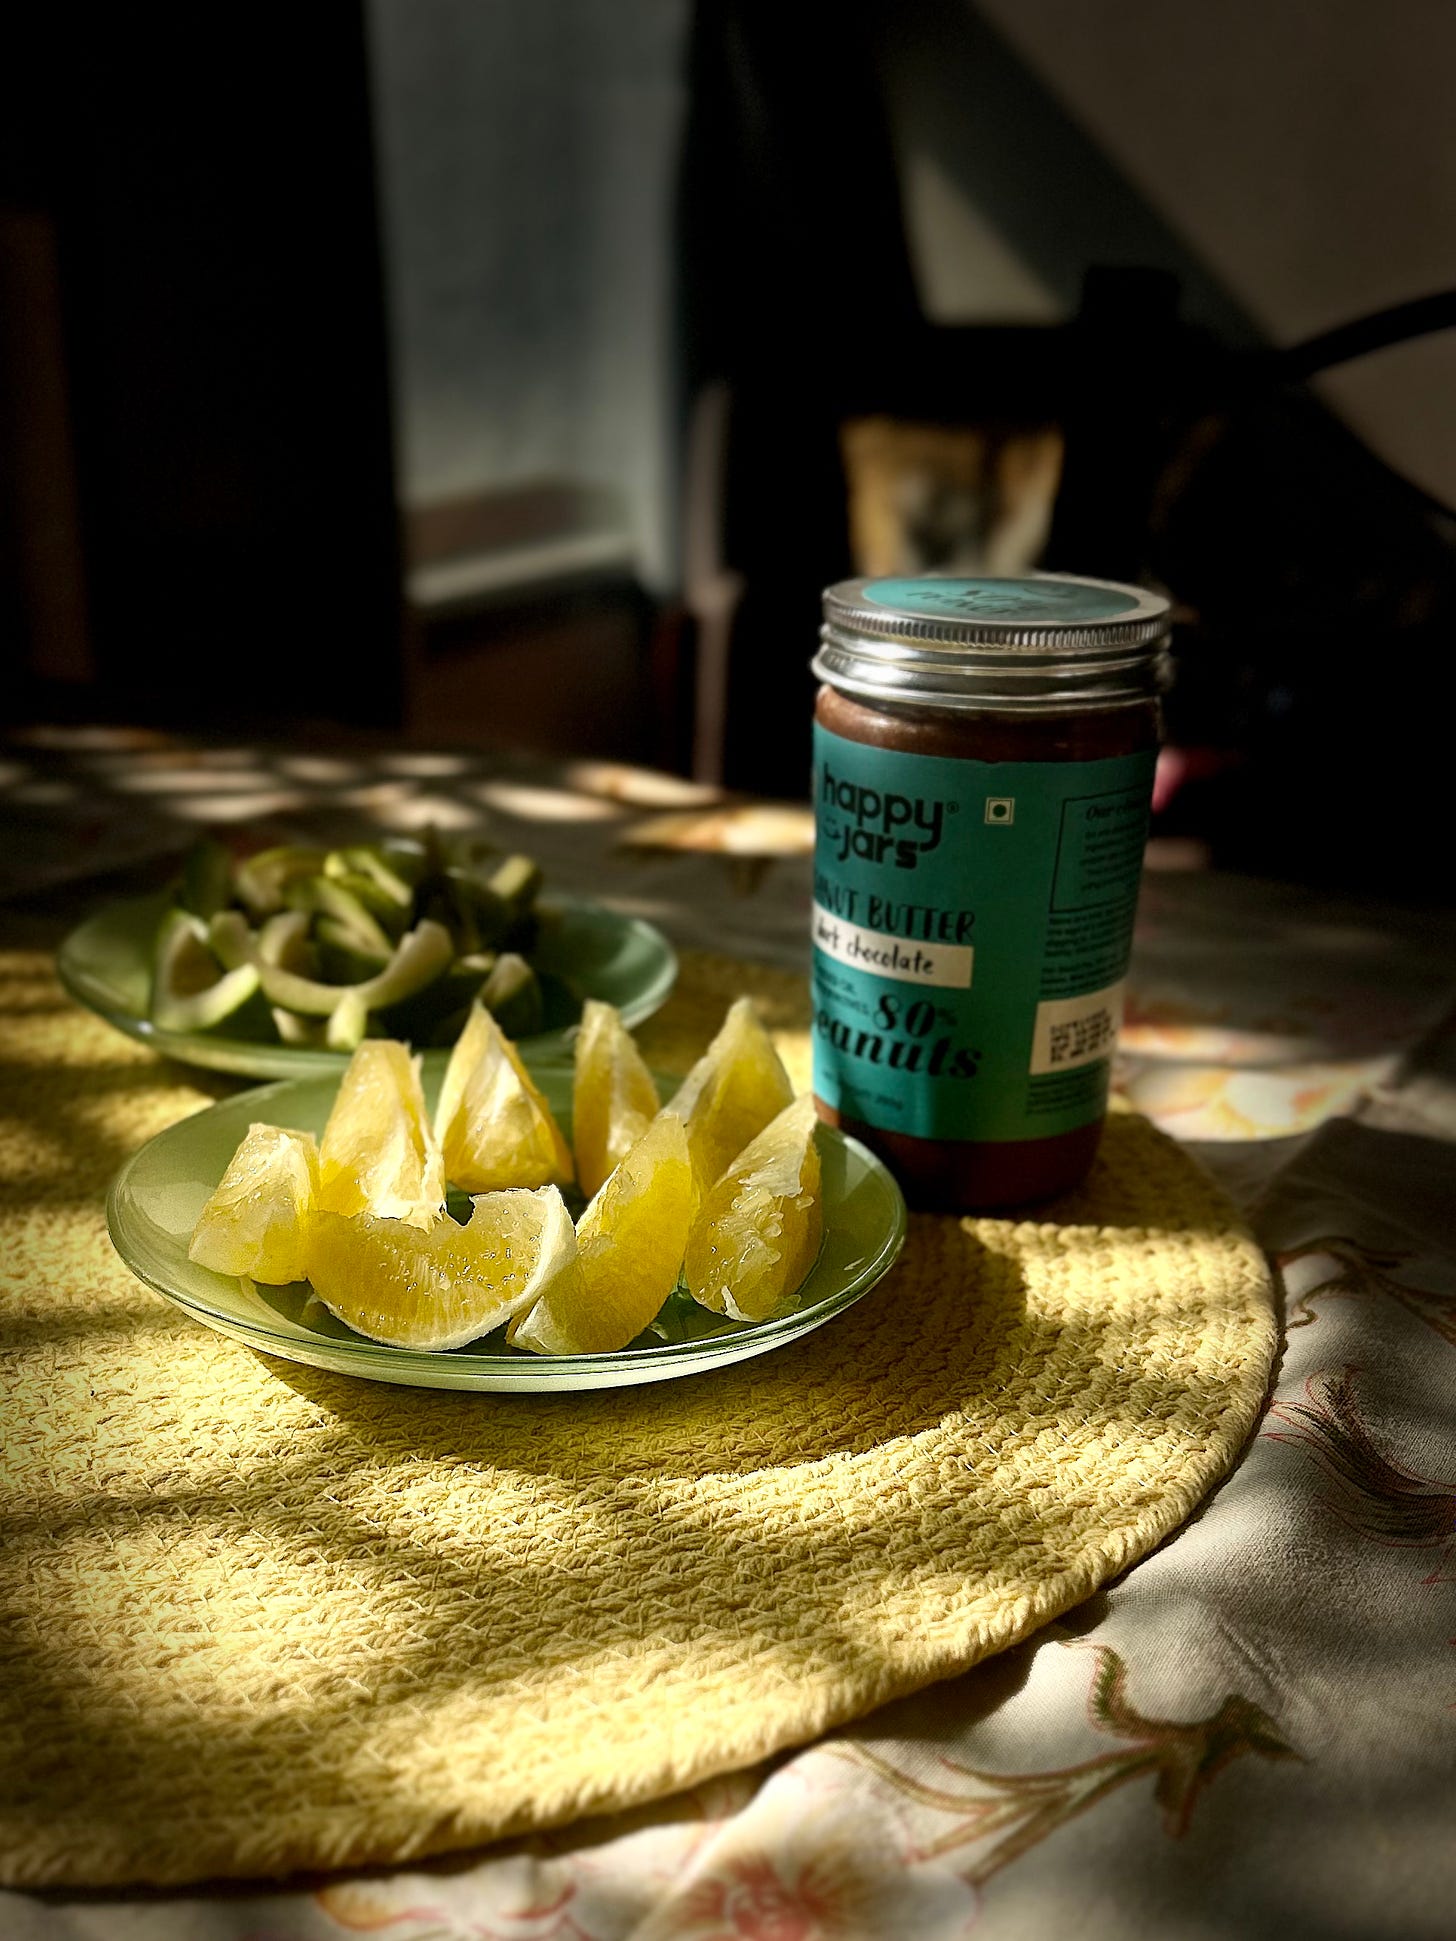 A beautiful picture of sun falling on a dining table in the morning hours. The yellow and green of the fruits and a peanut jar compliments the sunshine coming in the room.